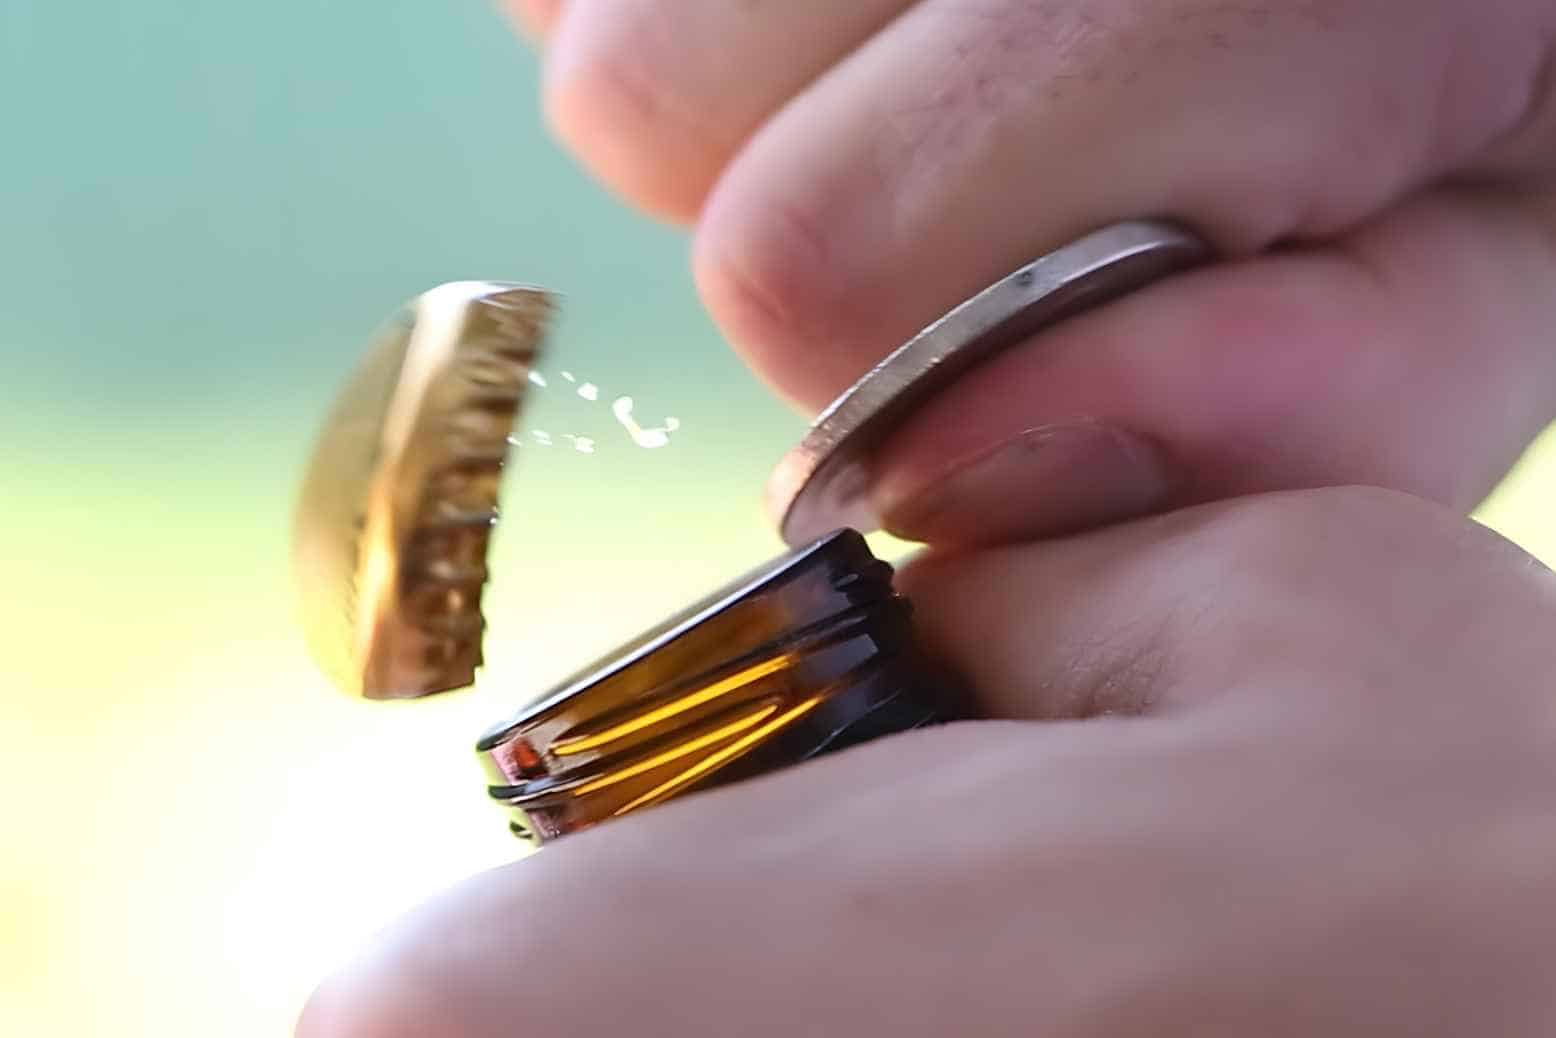 9 Methods to Open a Beer Bottle Without Opener